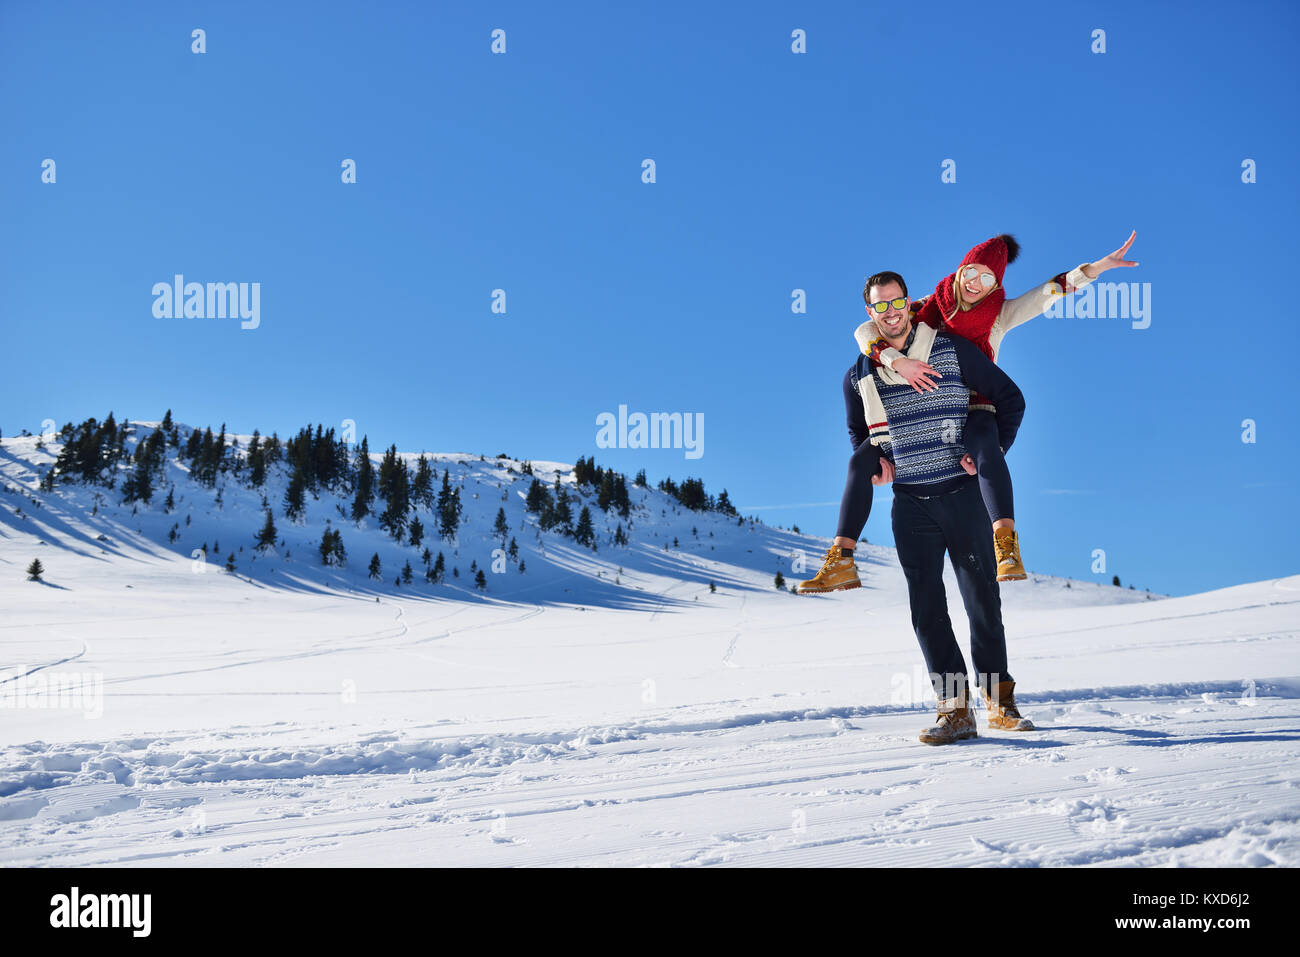 Young couple having fun on snow. Happy man at the mountain giving piggyback ride to his smiling girlfriend. Stock Photo